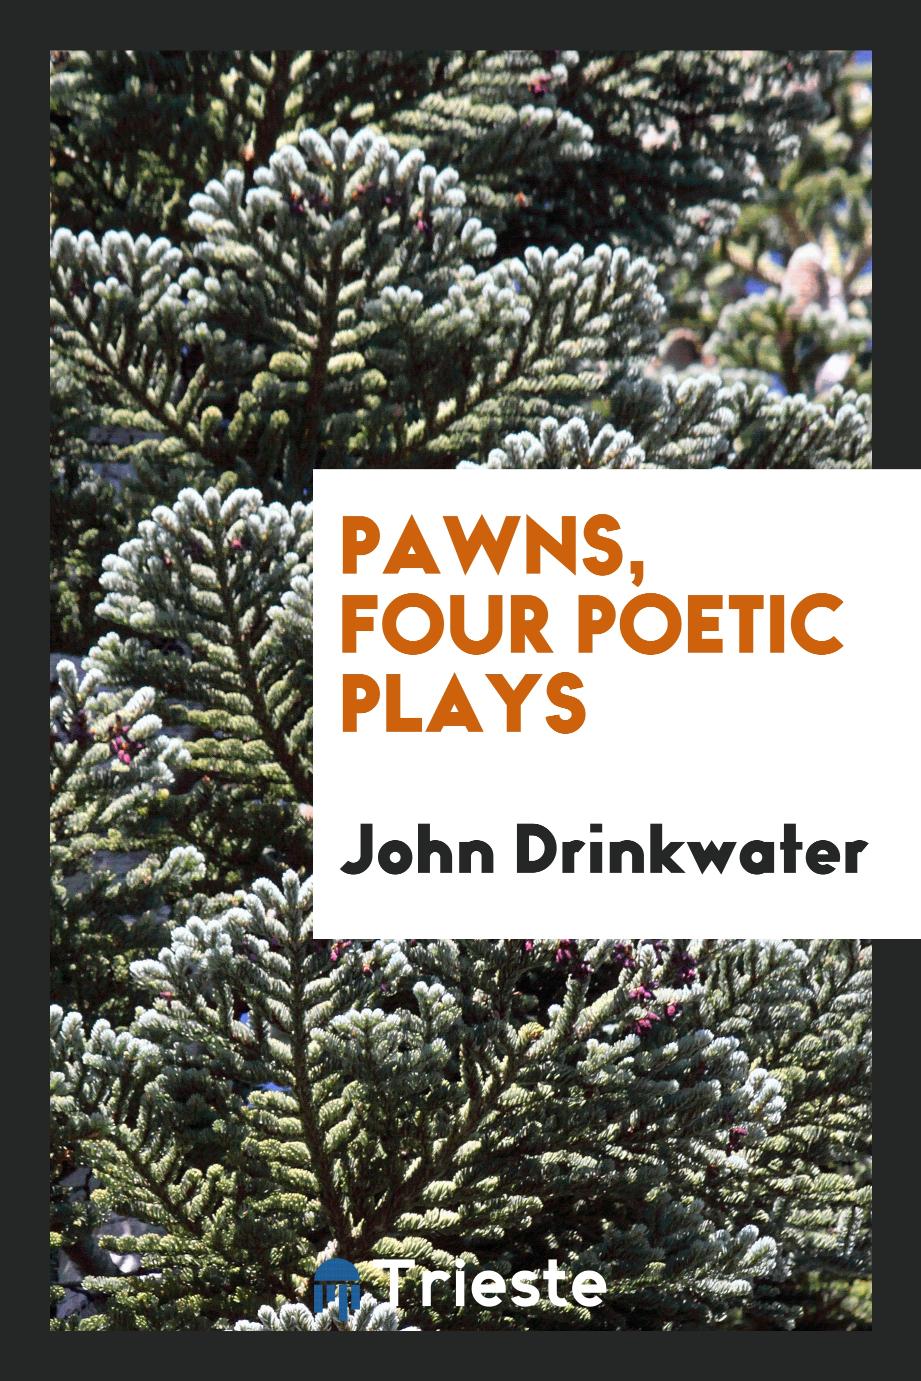 Pawns, four poetic plays